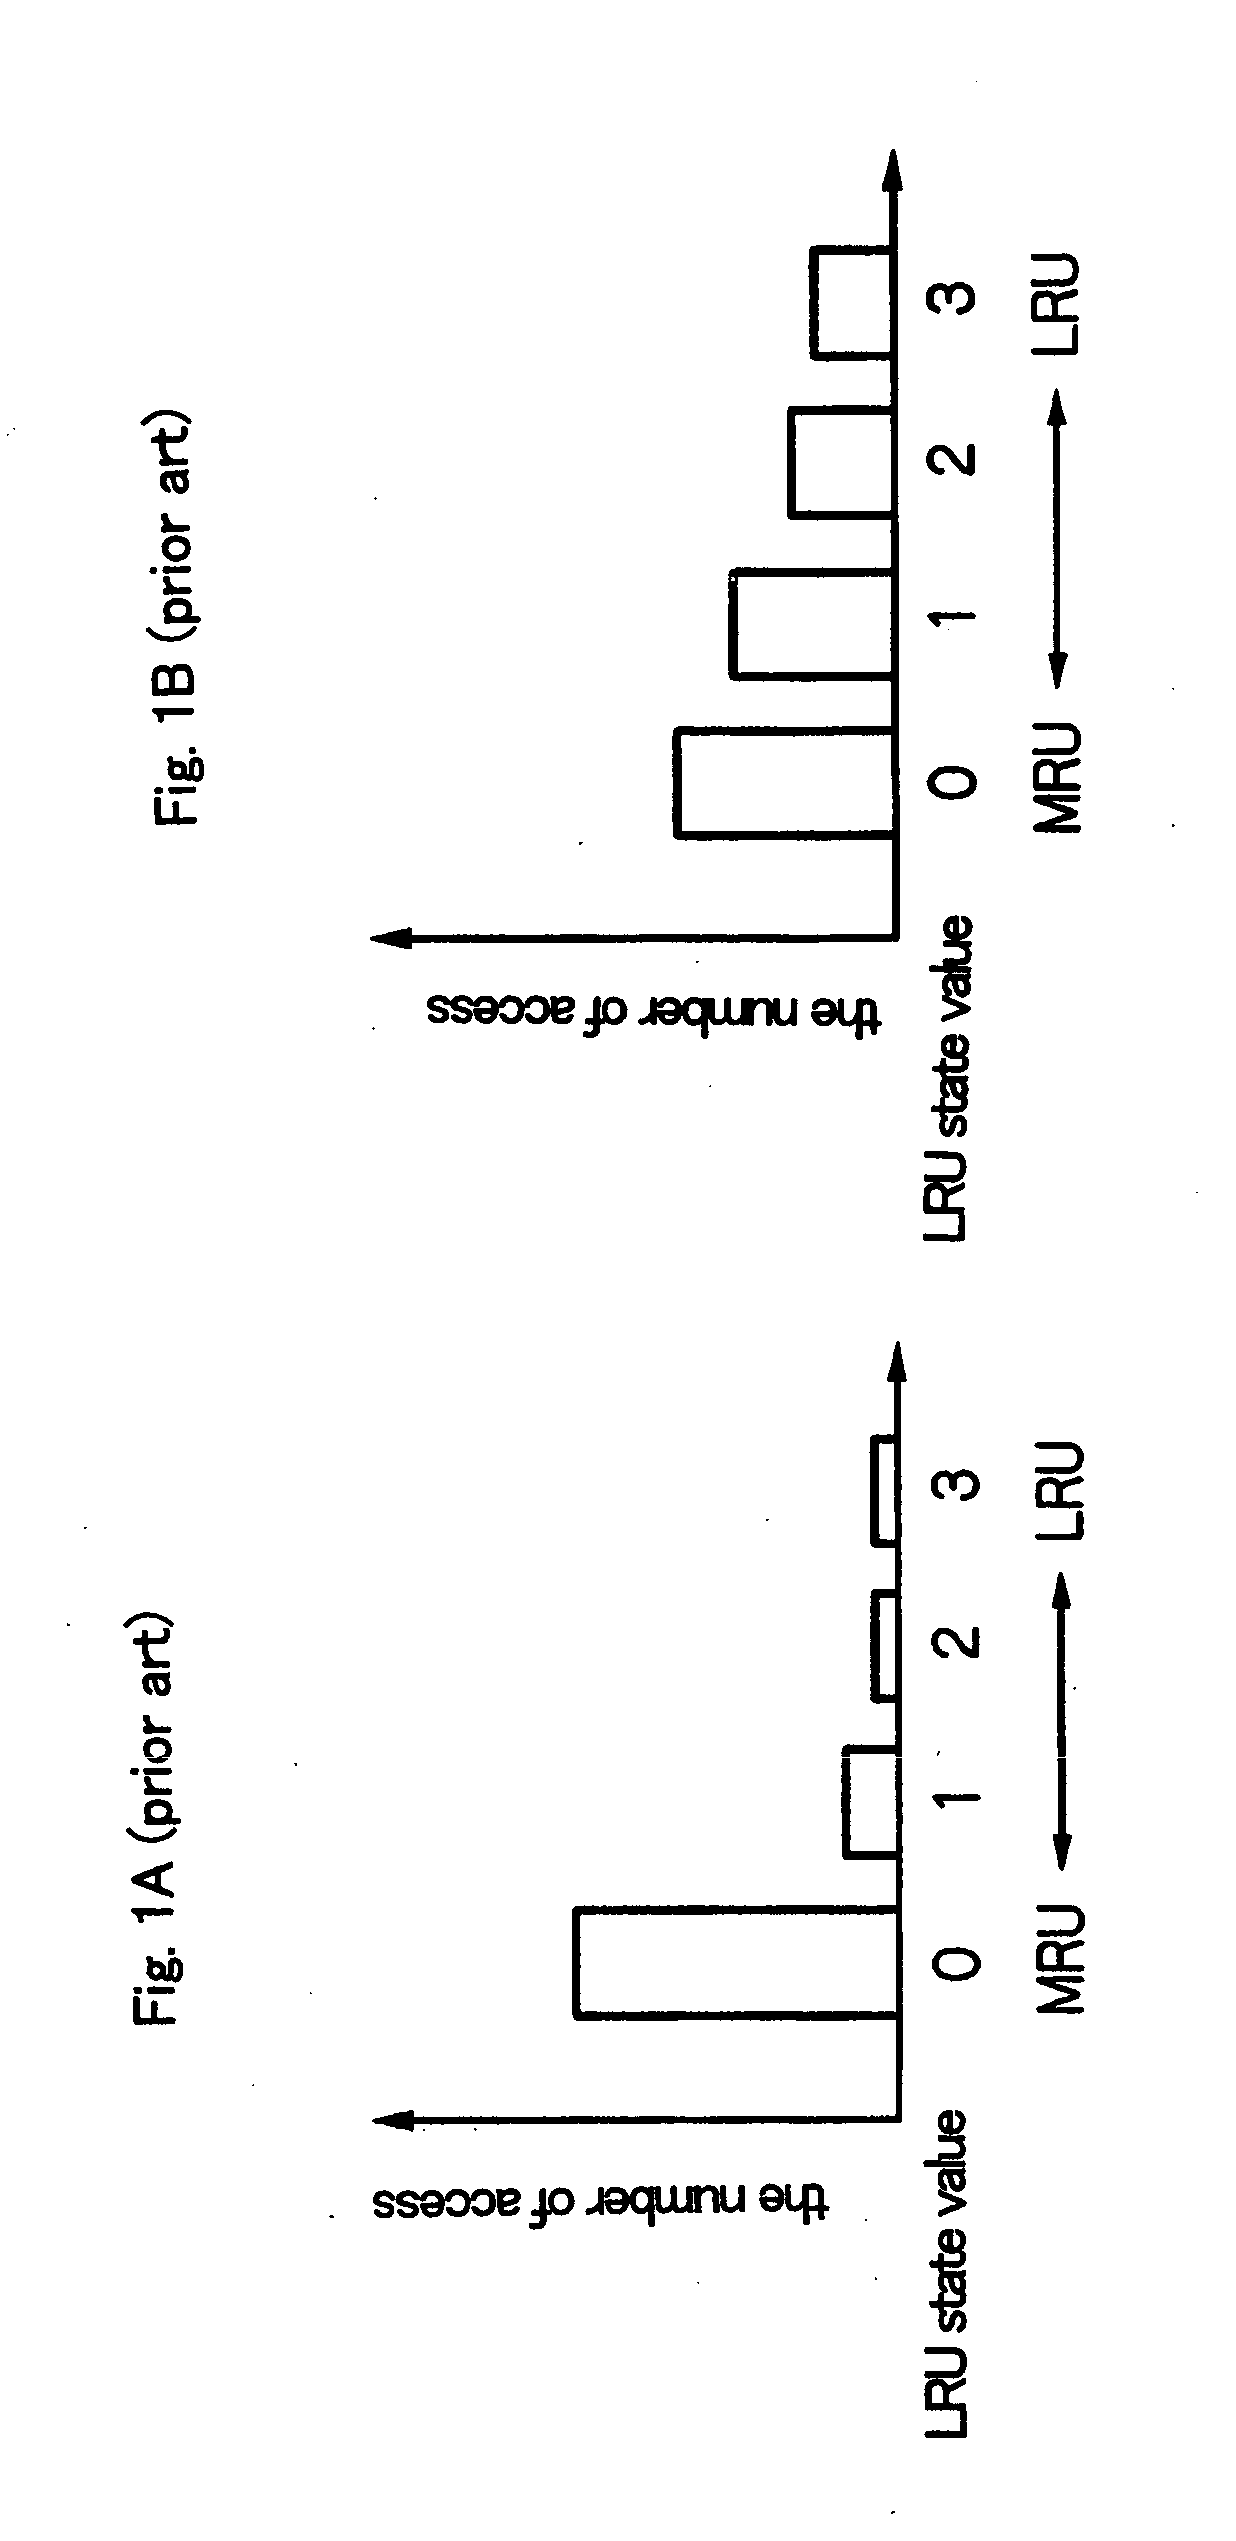 Cache memory with the number of operated ways being changed according to access pattern